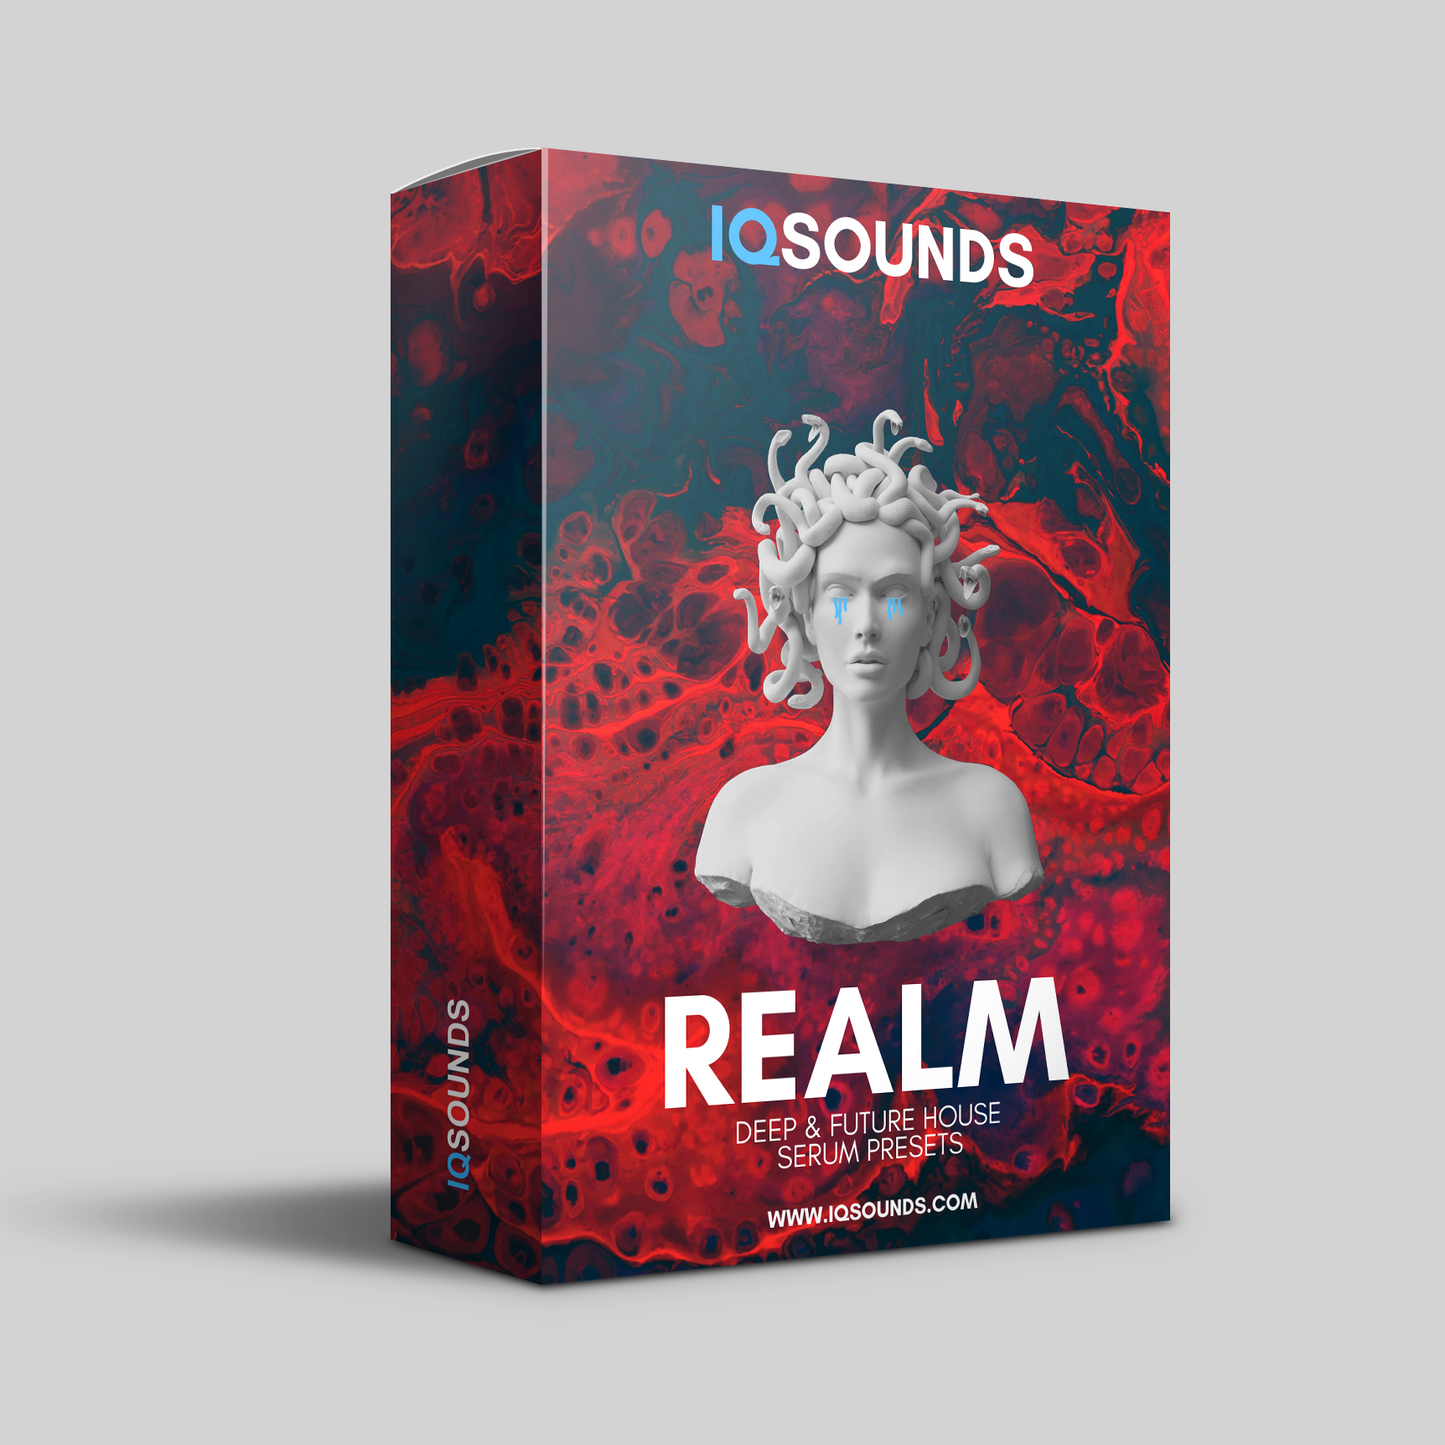 realm serum presets, deep house serum presets, future house serum presets, house serum presets, serum presets, serum deep house, serum future house, serum bass house, serum brazilian bass, serum bass, serum presets download, iqsounds